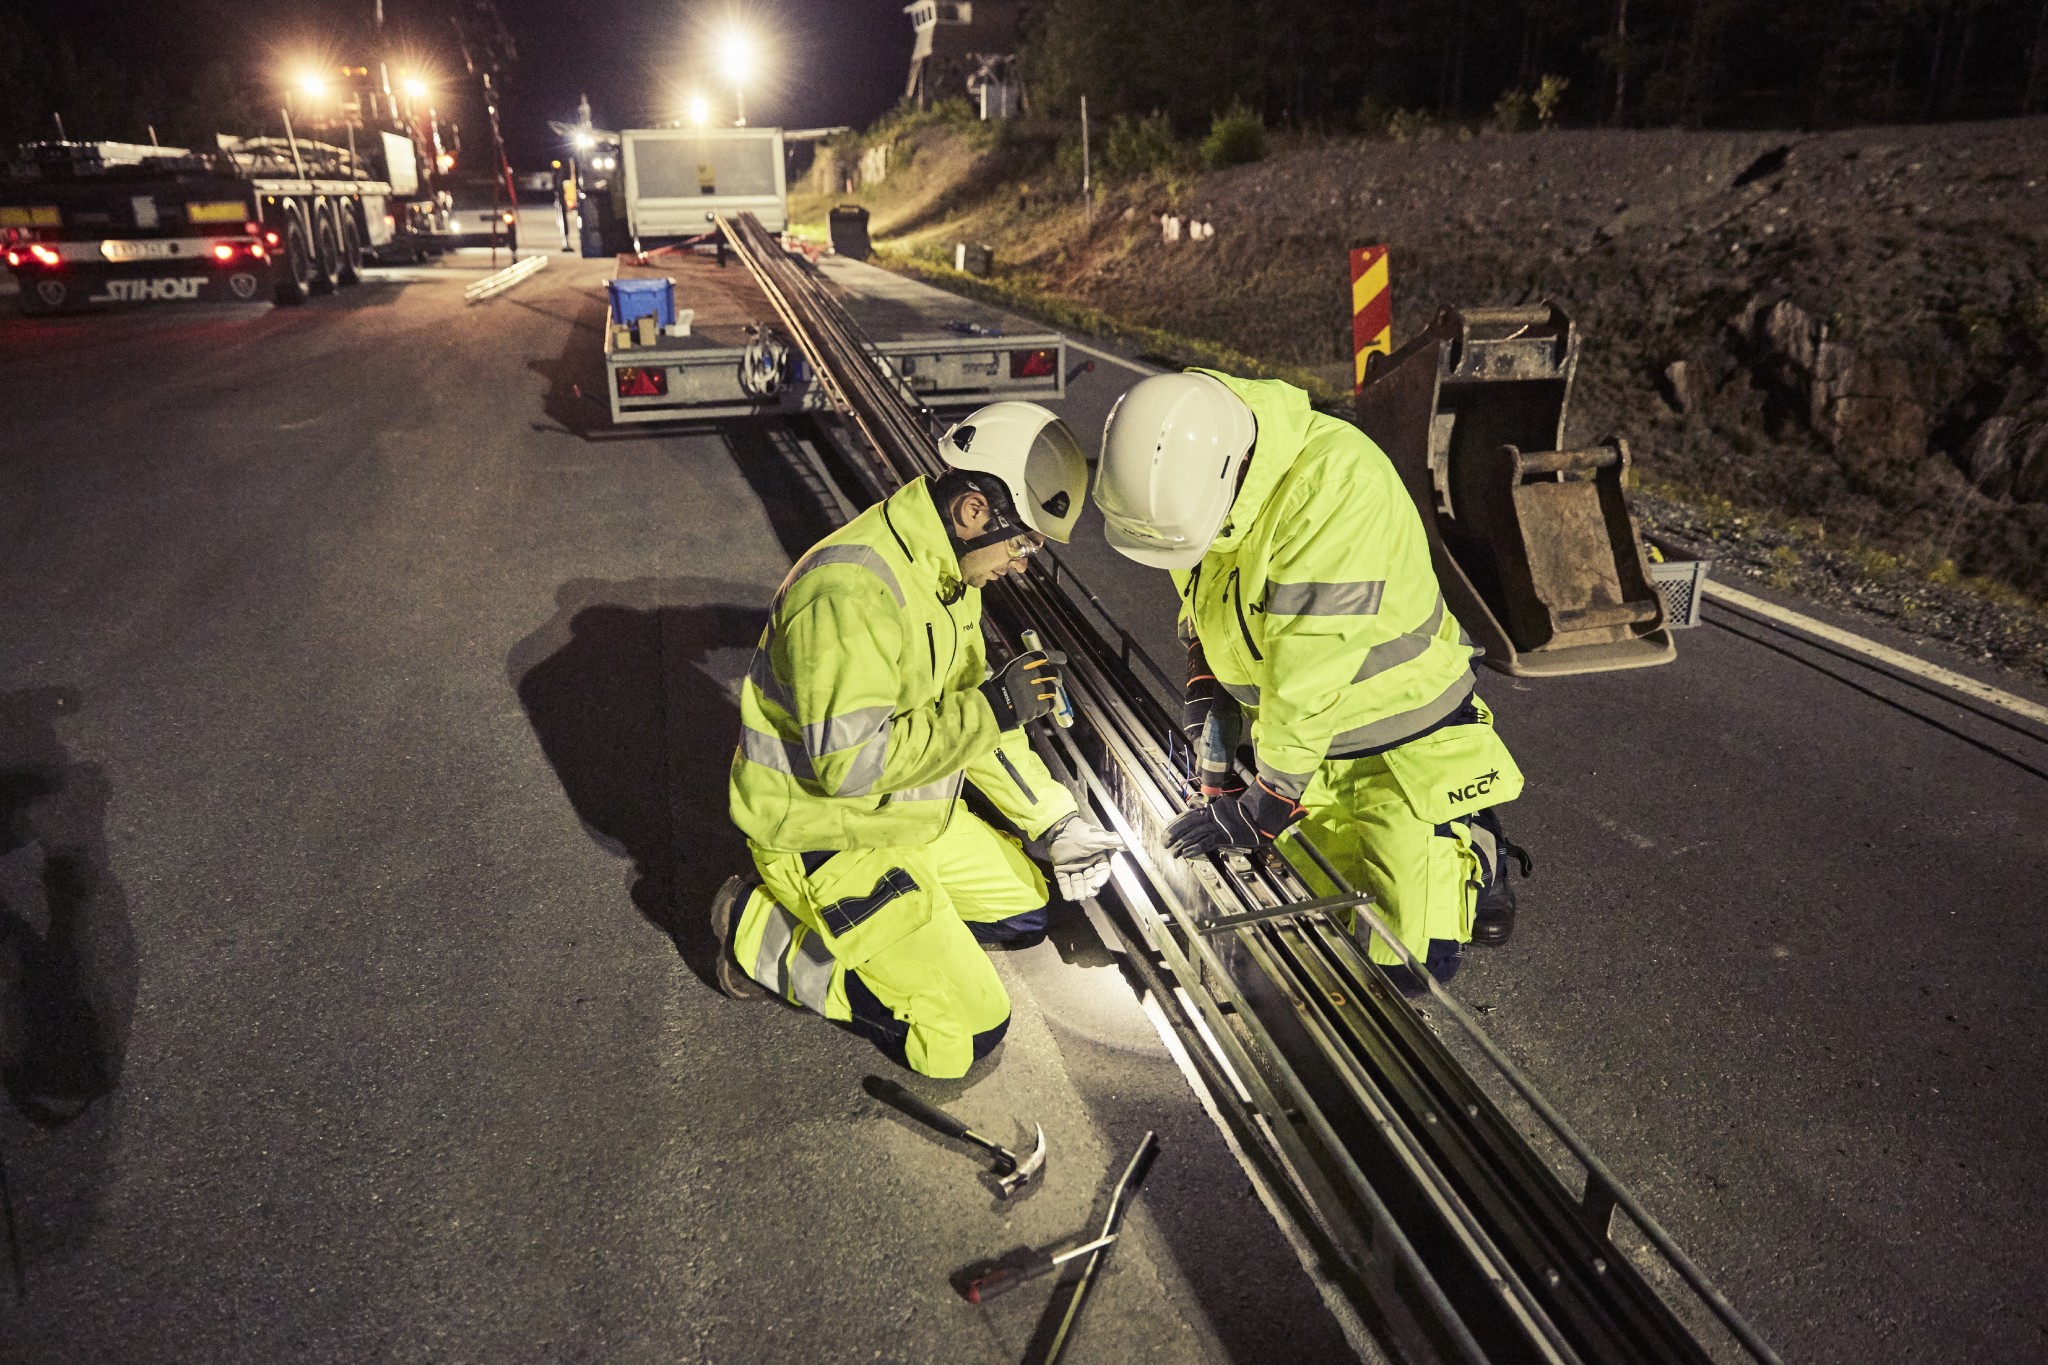 Existing public roads can be energised with an electric rail to power and recharge vehicles during their journey, with up to 1km of rail installed per hour, and interruptions minimised by installing the system at night.